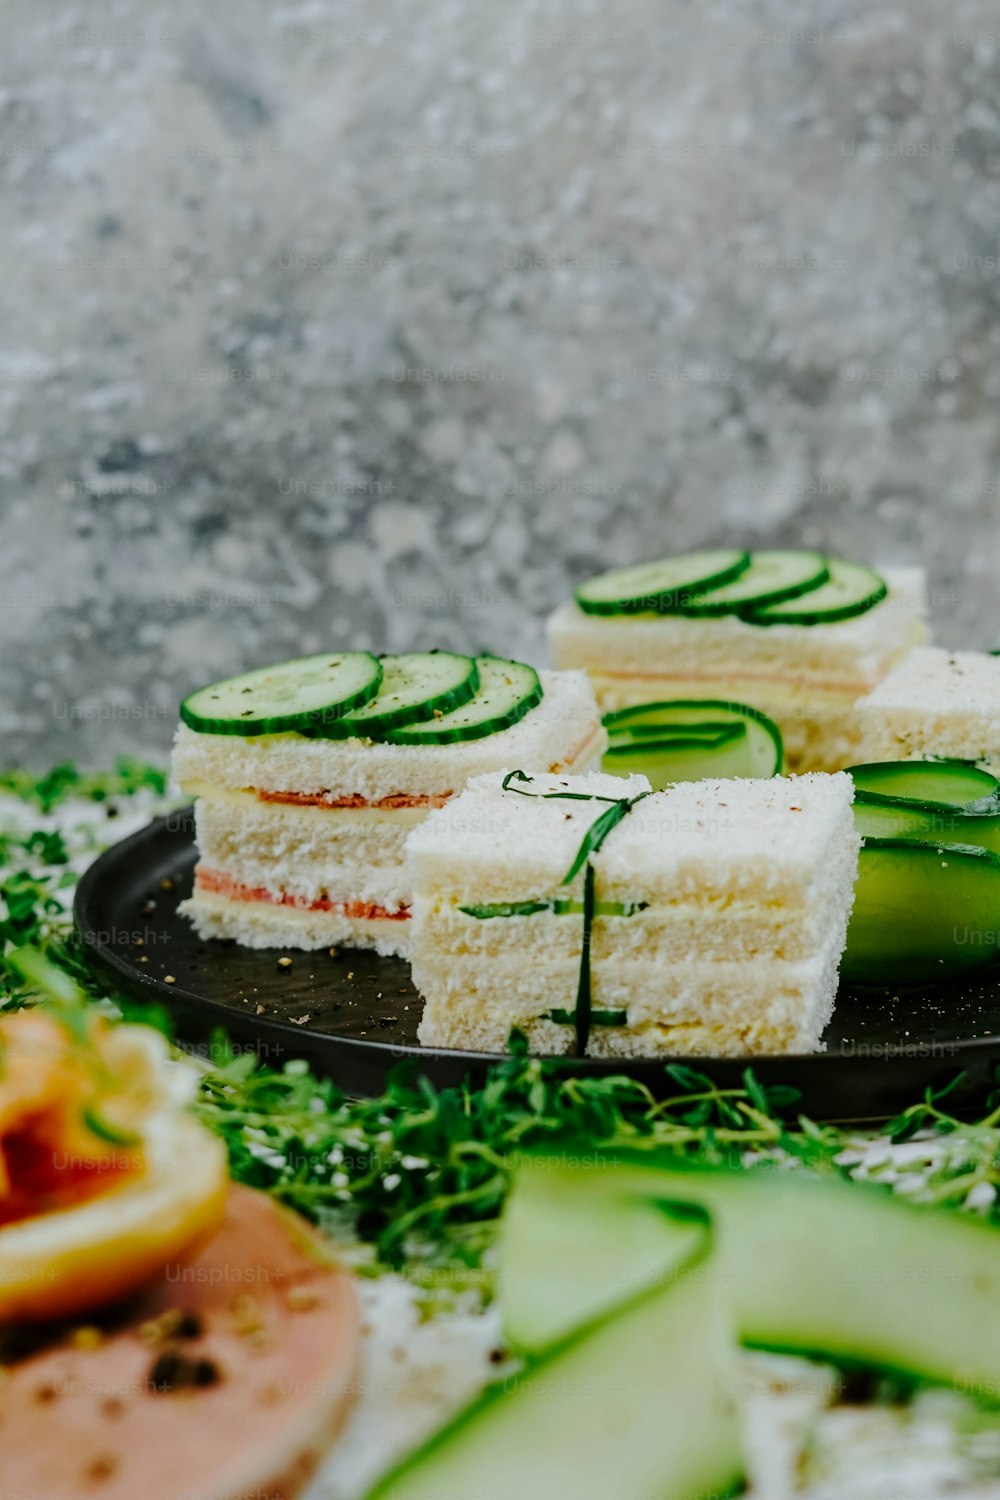 cucumber slices are arranged on a black plate